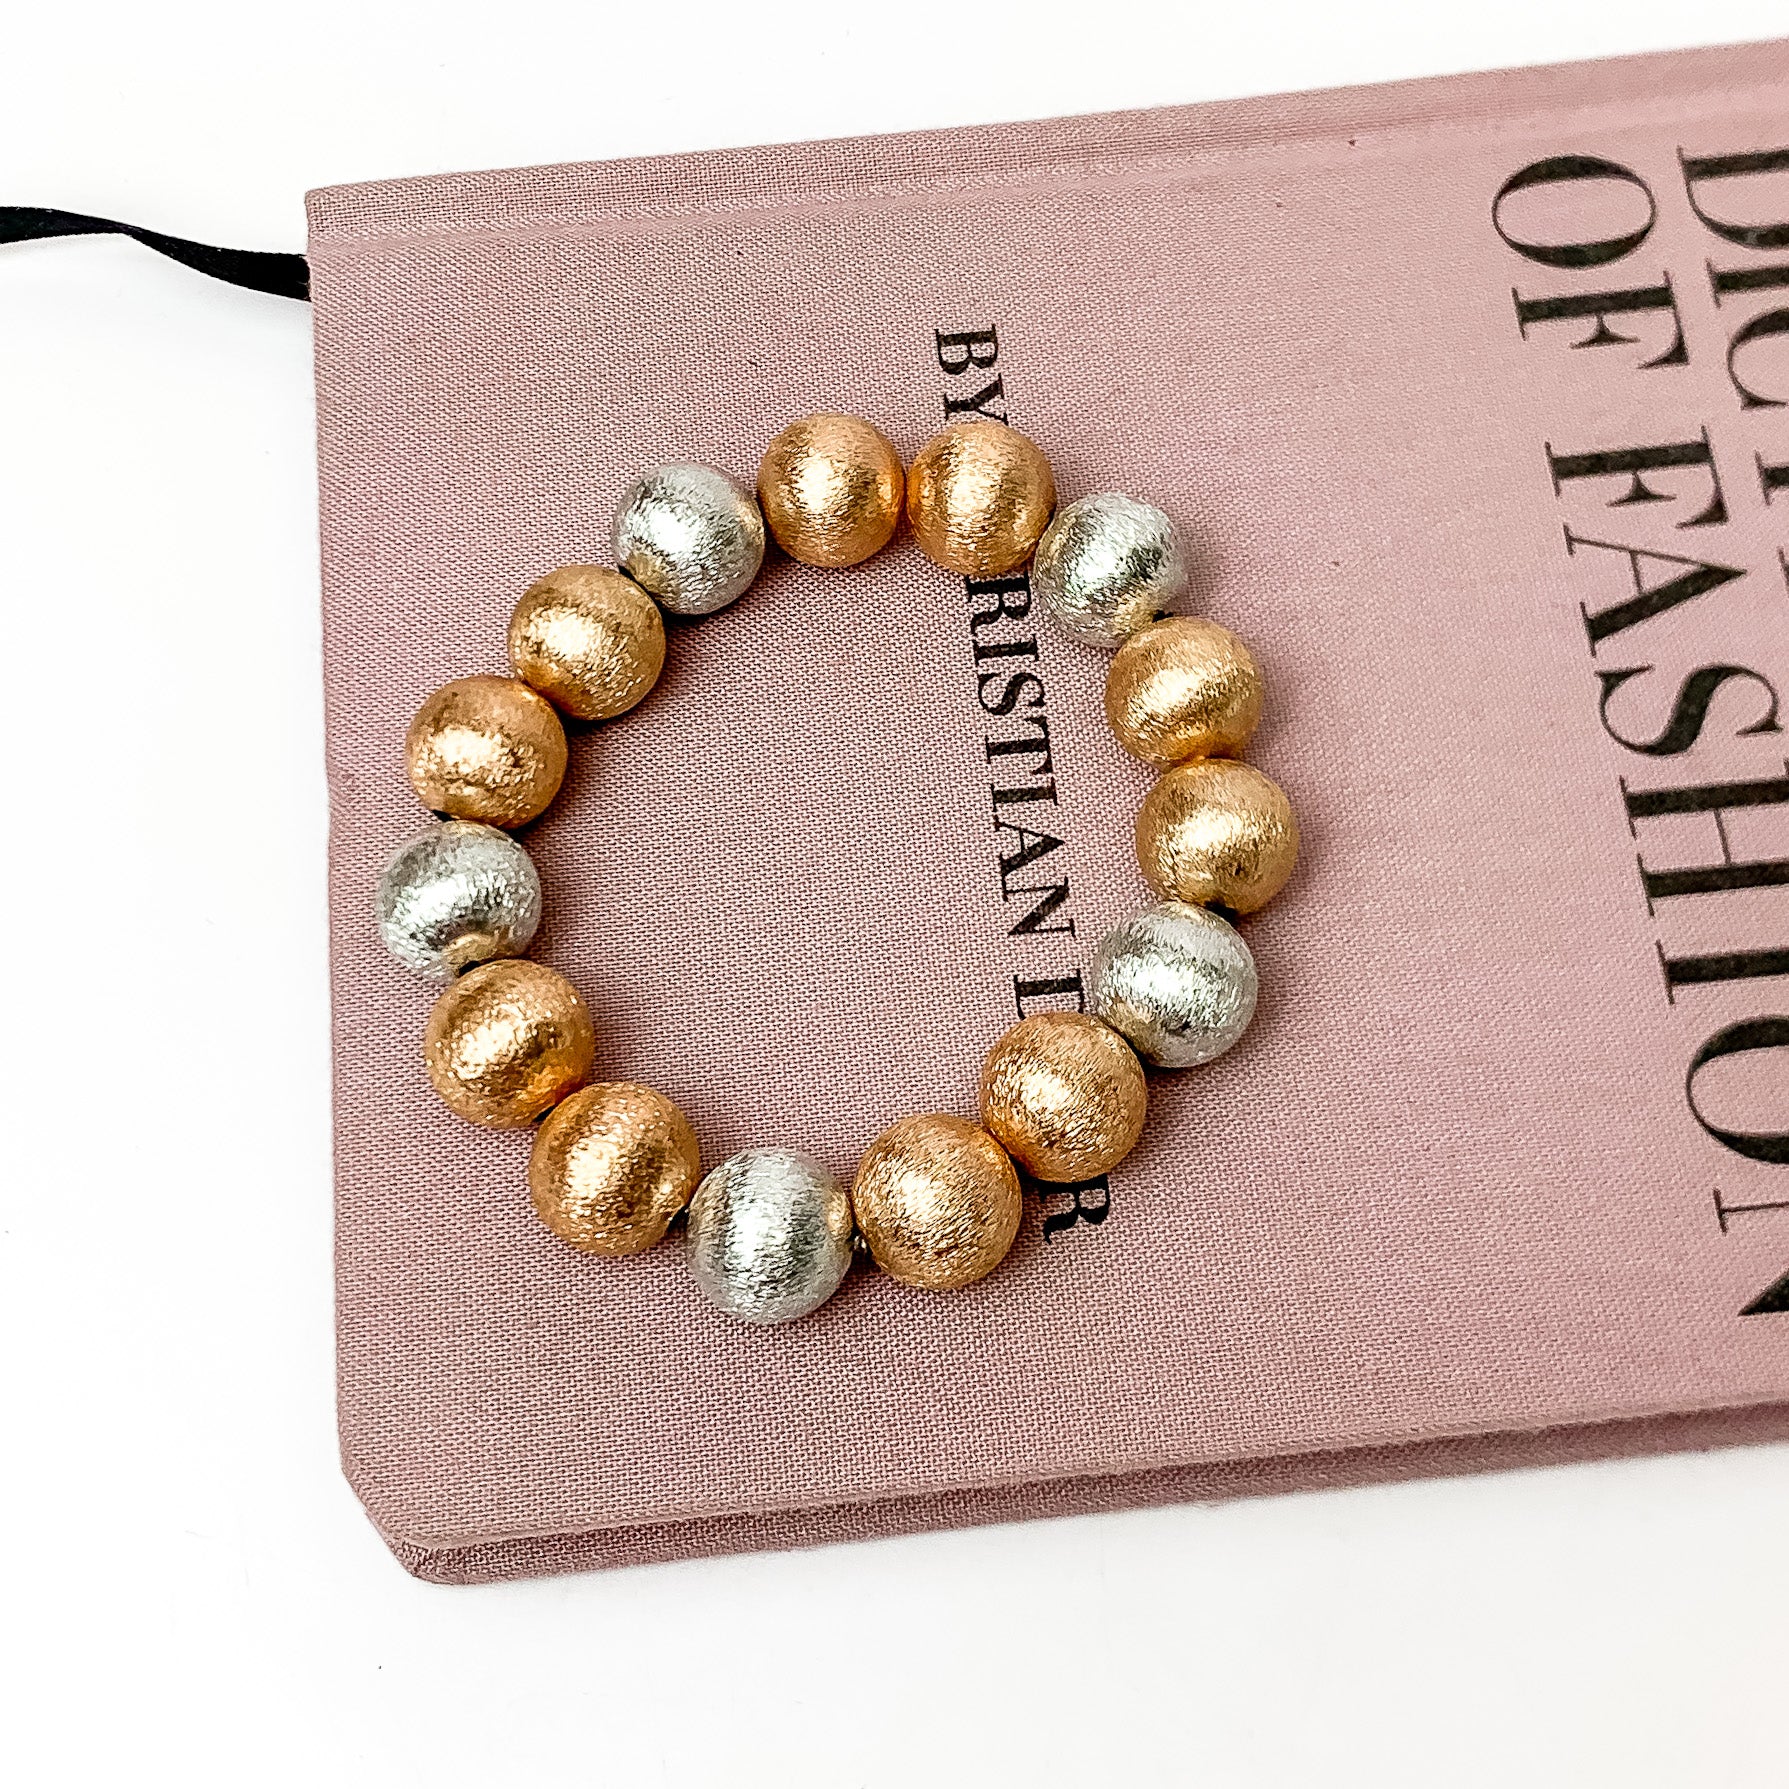 Large mixed metals beaded bracelets. This bracelet is pictured on a pink book with a white background.